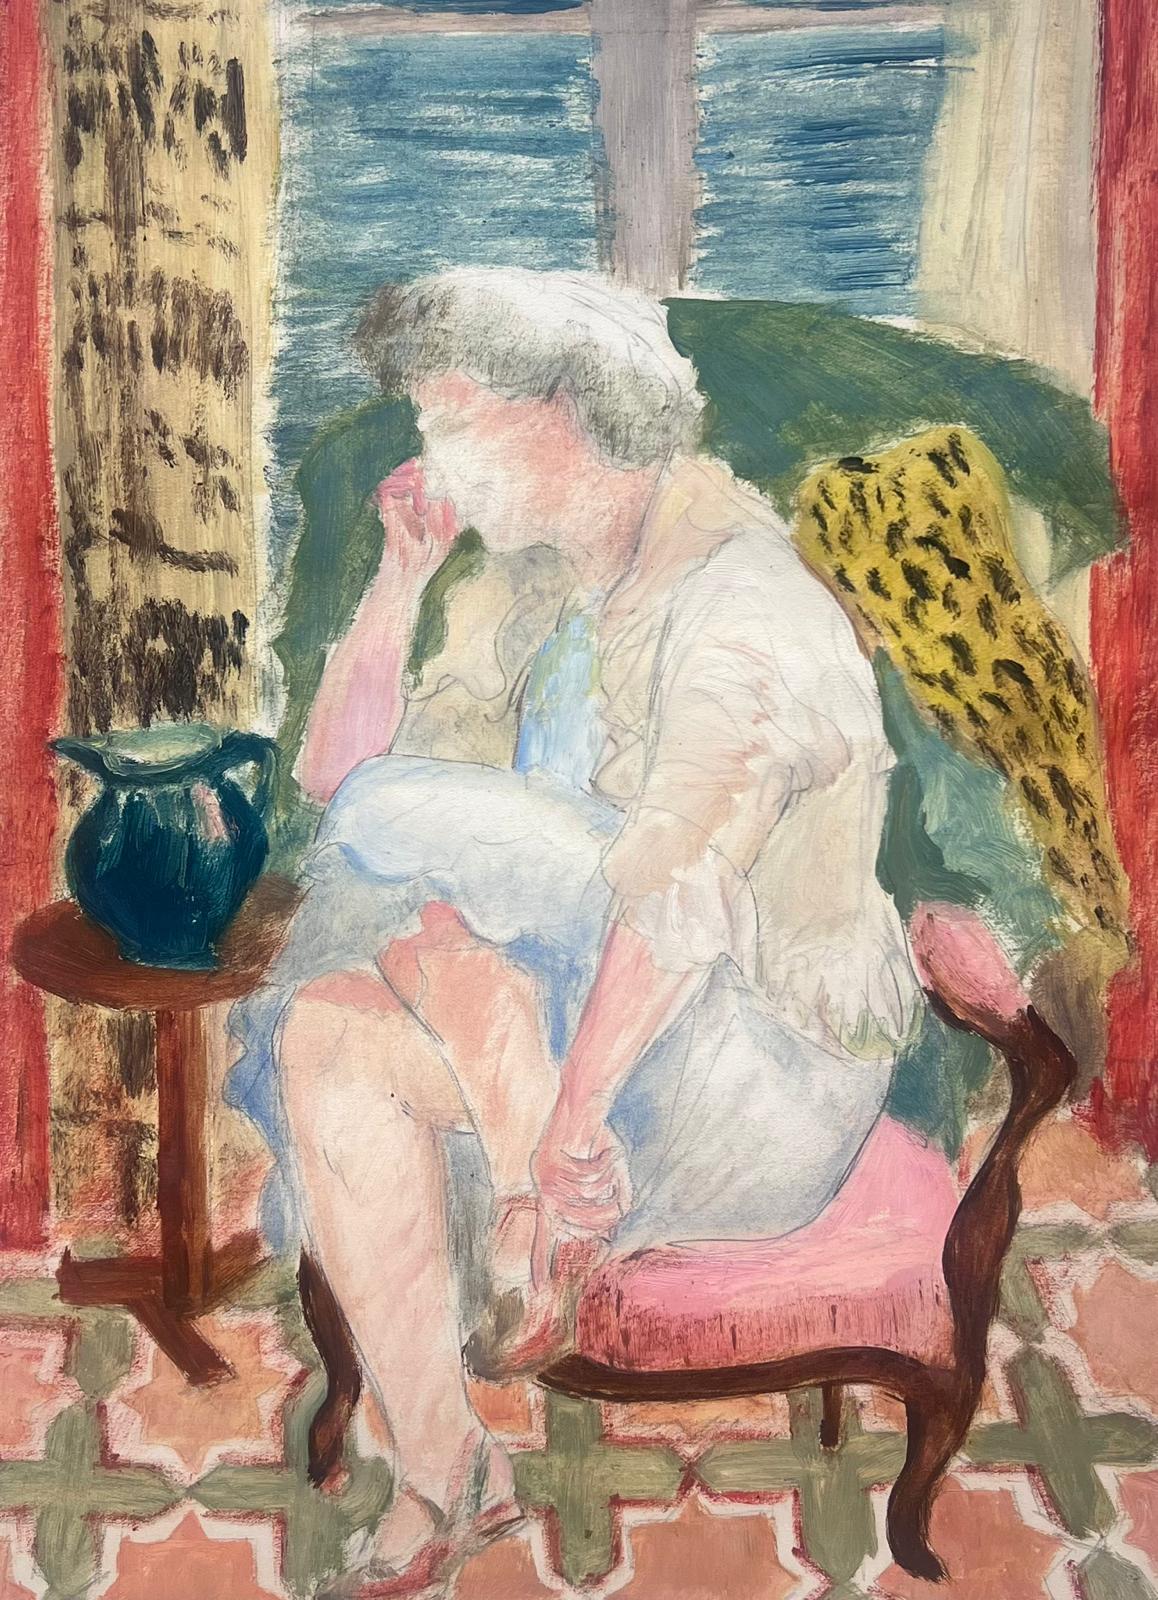 Josine Vignon Portrait Painting - 1950s French Interior Scene Lady Seated at Chair Fauvist Colors